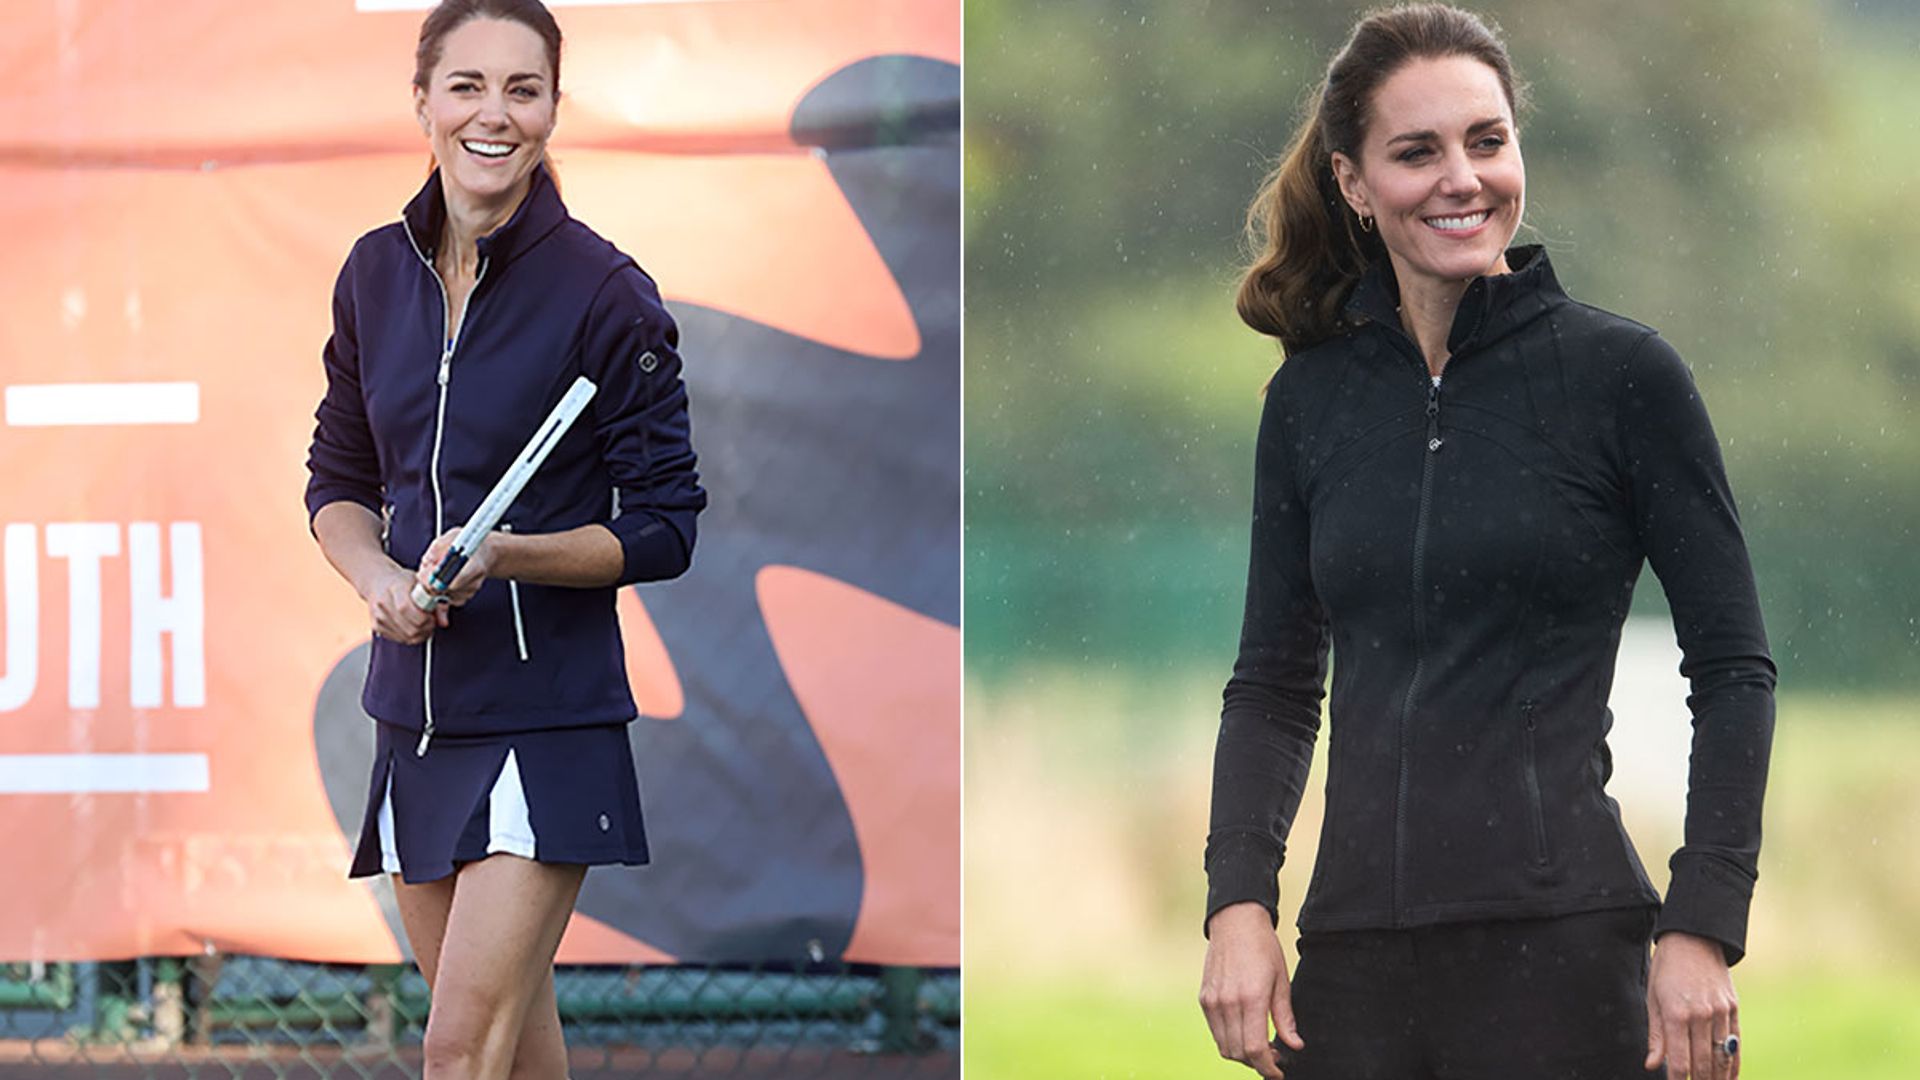 Kate Middleton’s epic training routine is not for the faint hearted